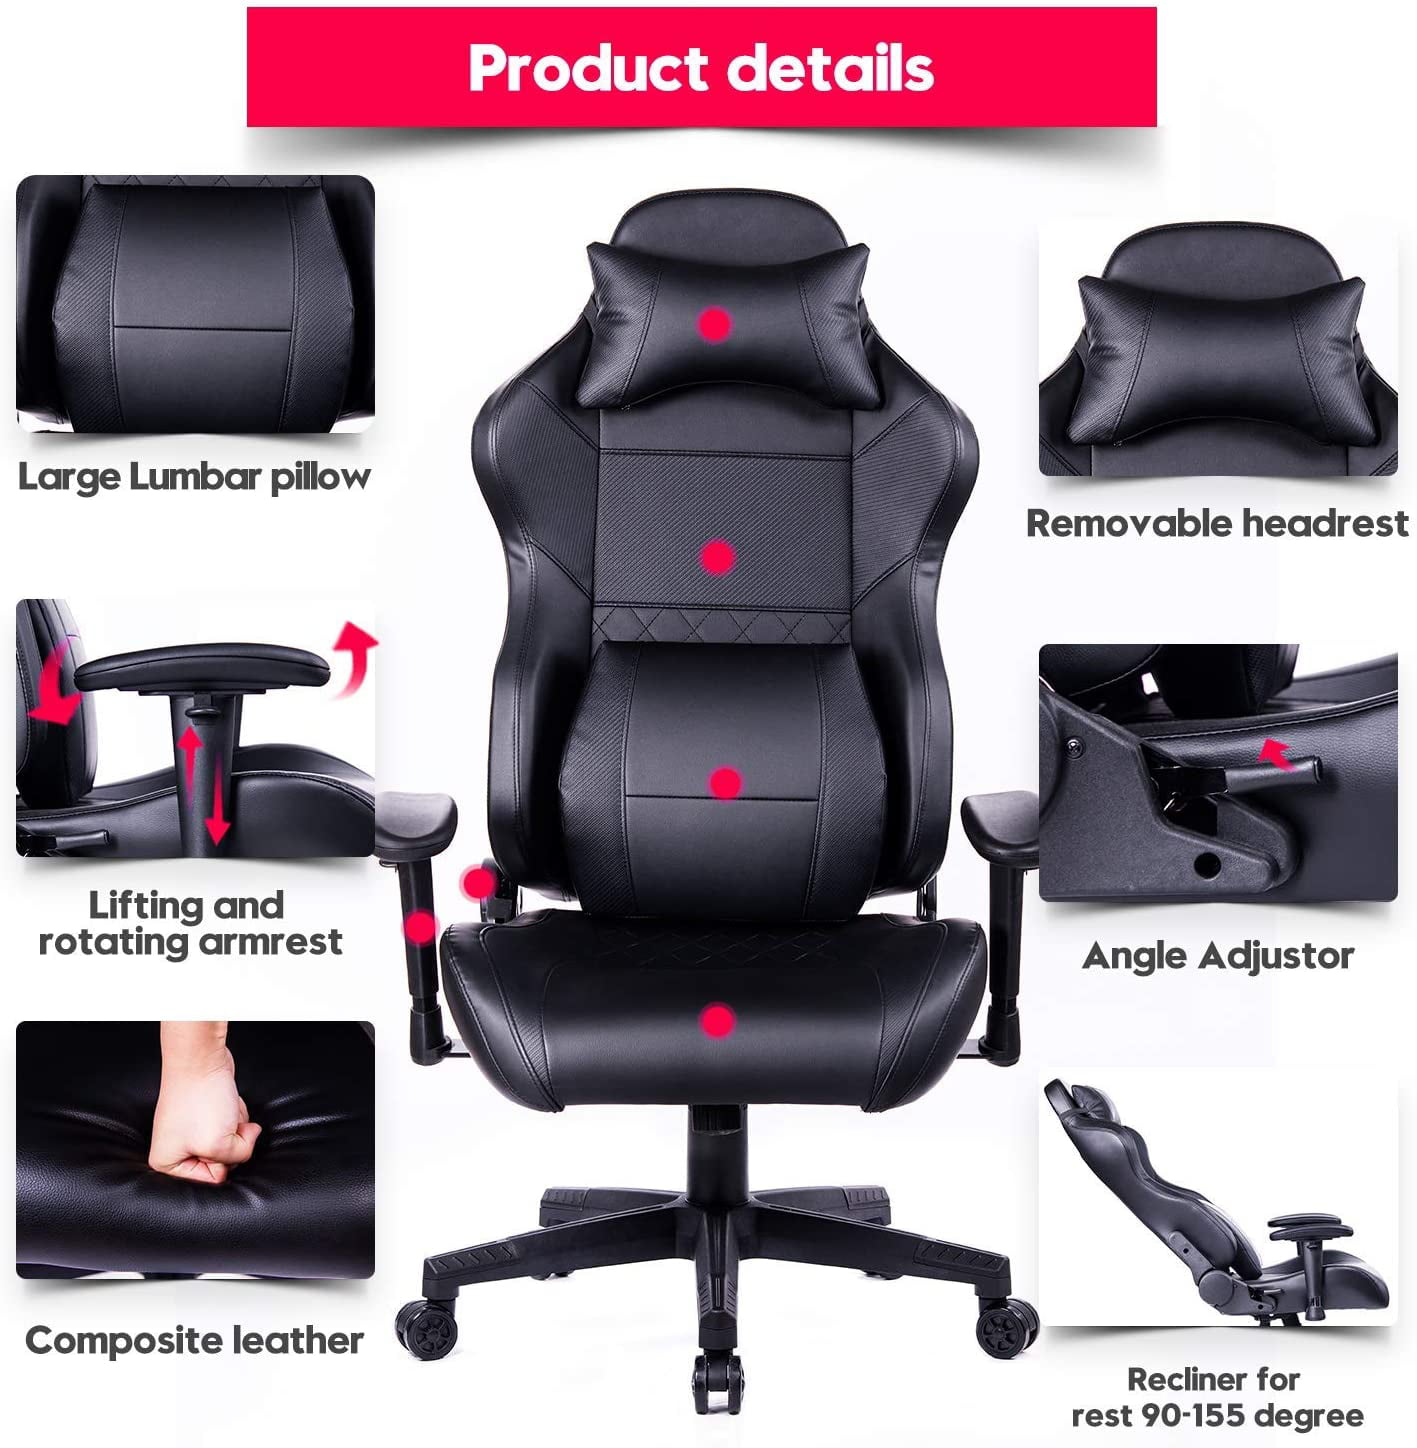 Healgen Gaming Chair Integrated Adjustable Lumbar Cushion High-Performance Metal Base Adjustable Armrest and High Backrest Made of Leather Racing Style Computer Desk Office Chair 8238-2Grey 